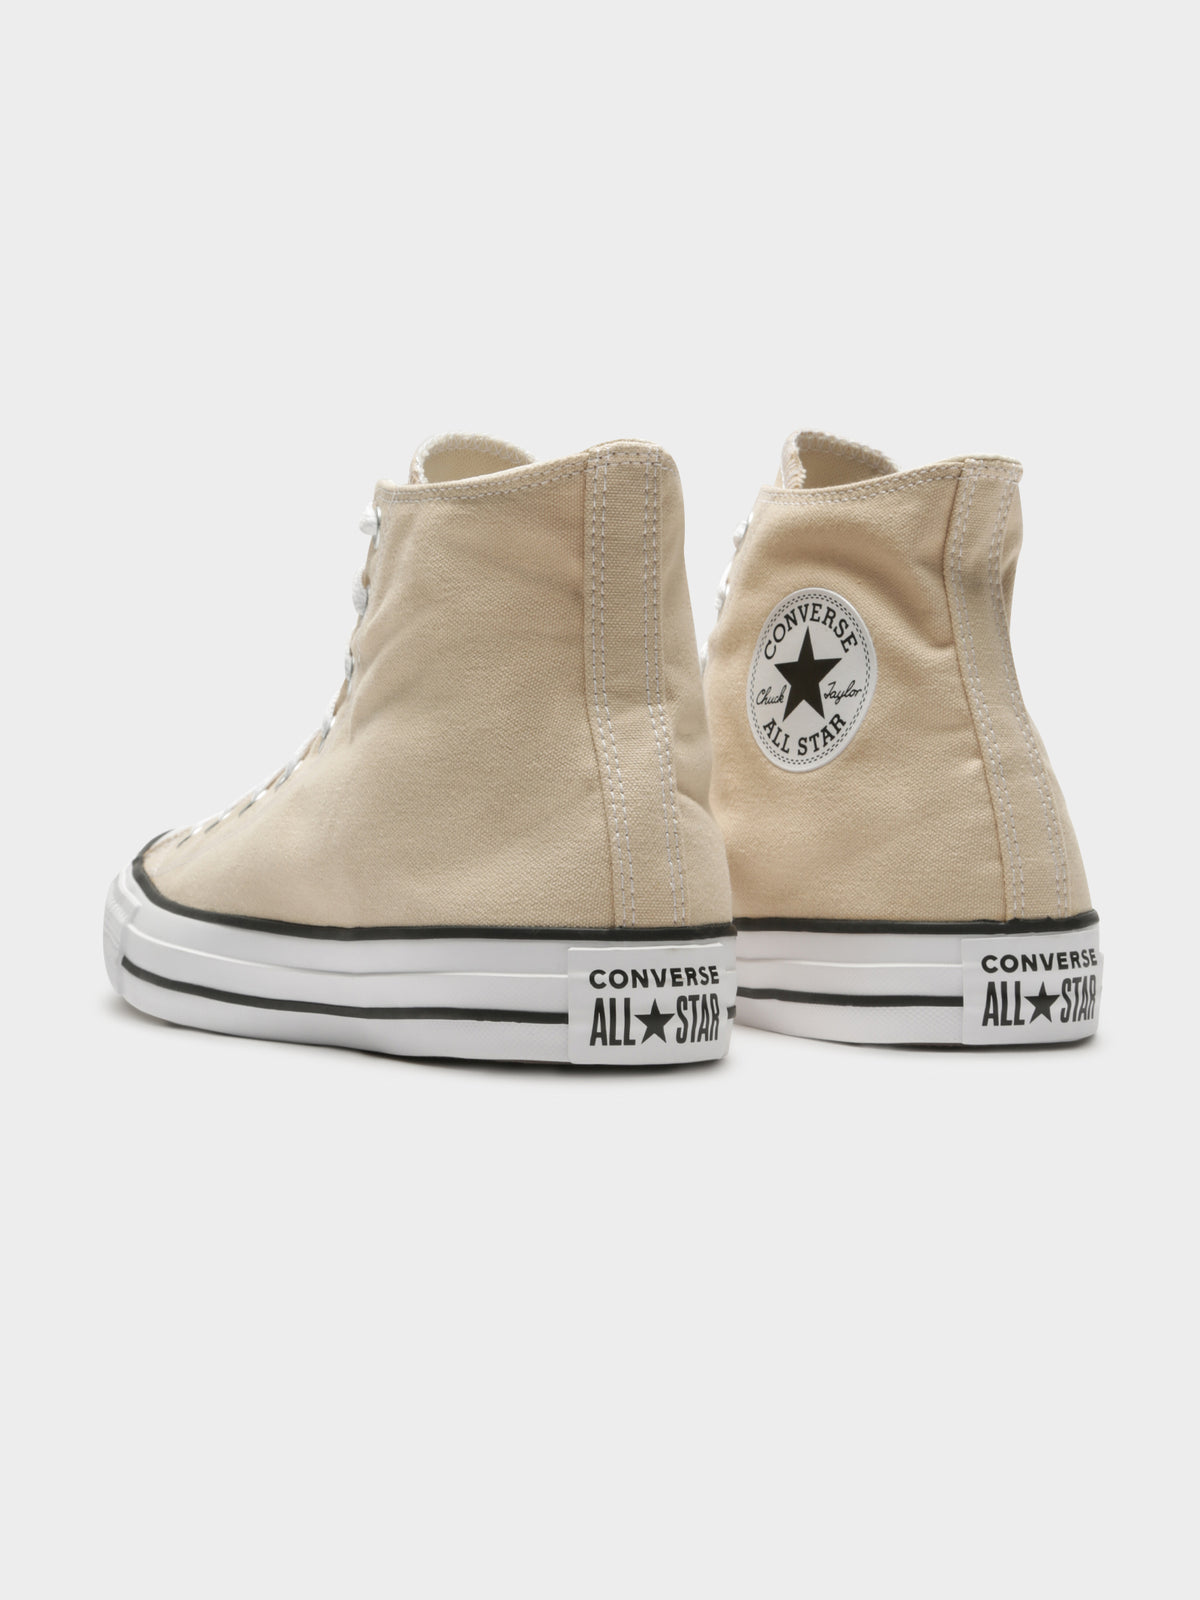 Unisex Chuck Taylor High Top Sneakers in Farro